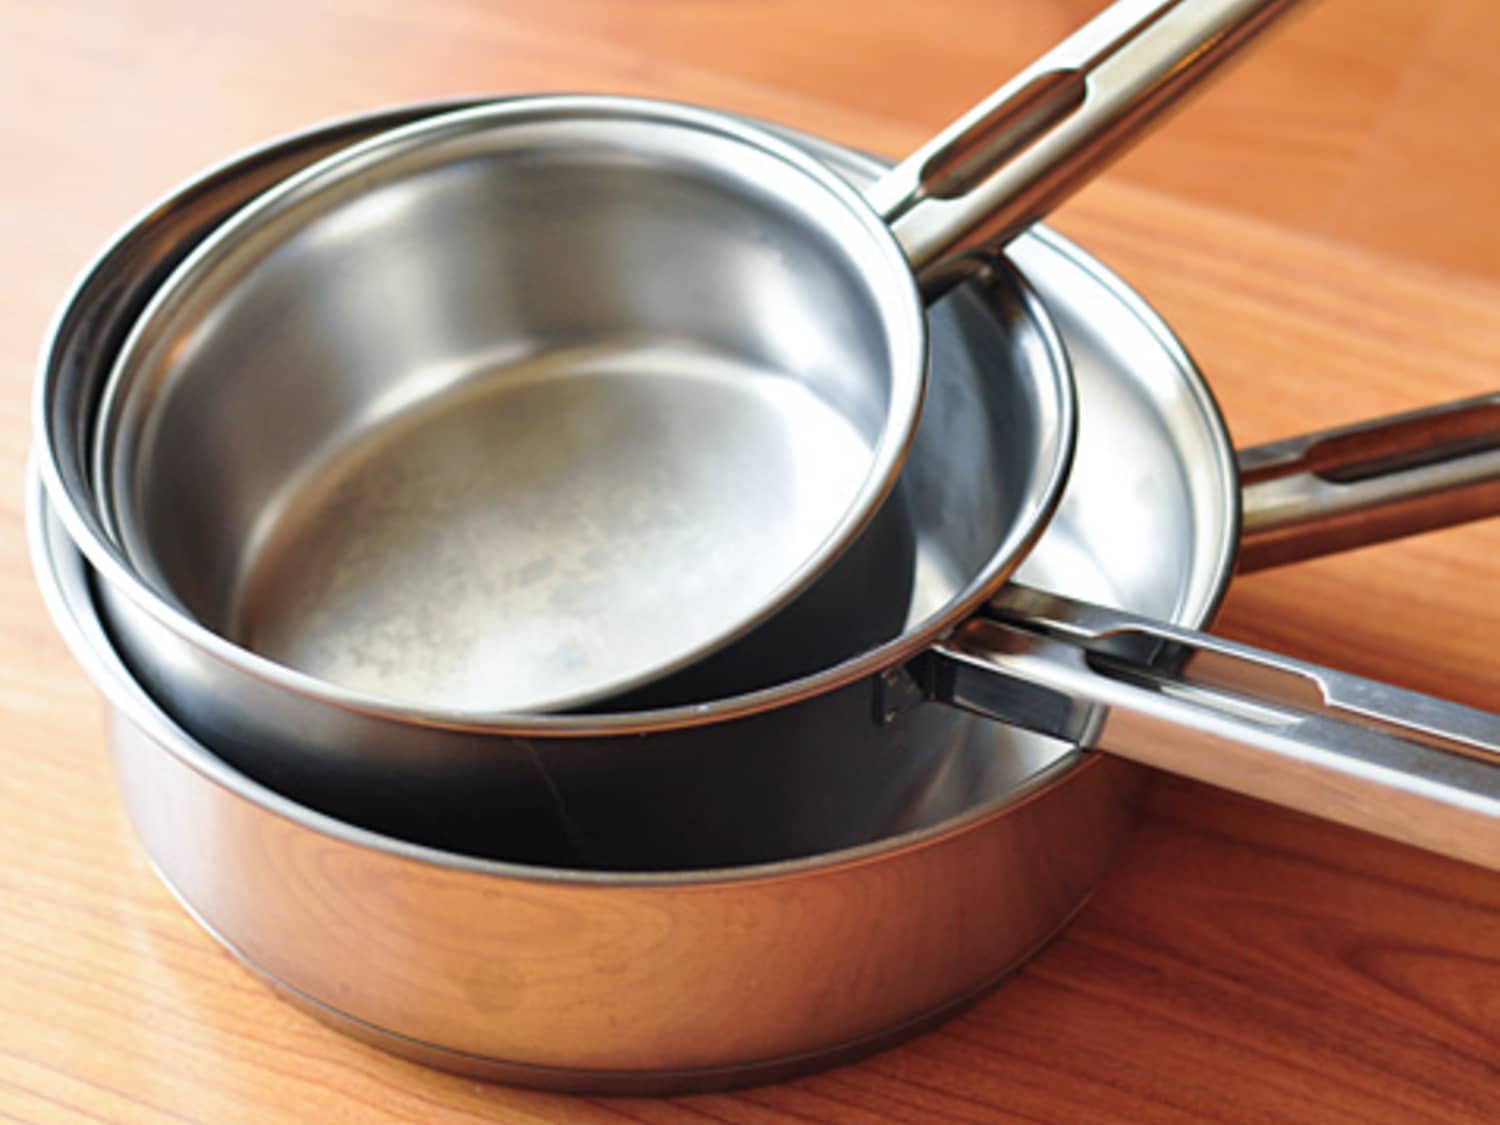 Tramontina Gourmet Tri-ply Clad 12 Fry Pan With Helper Handle